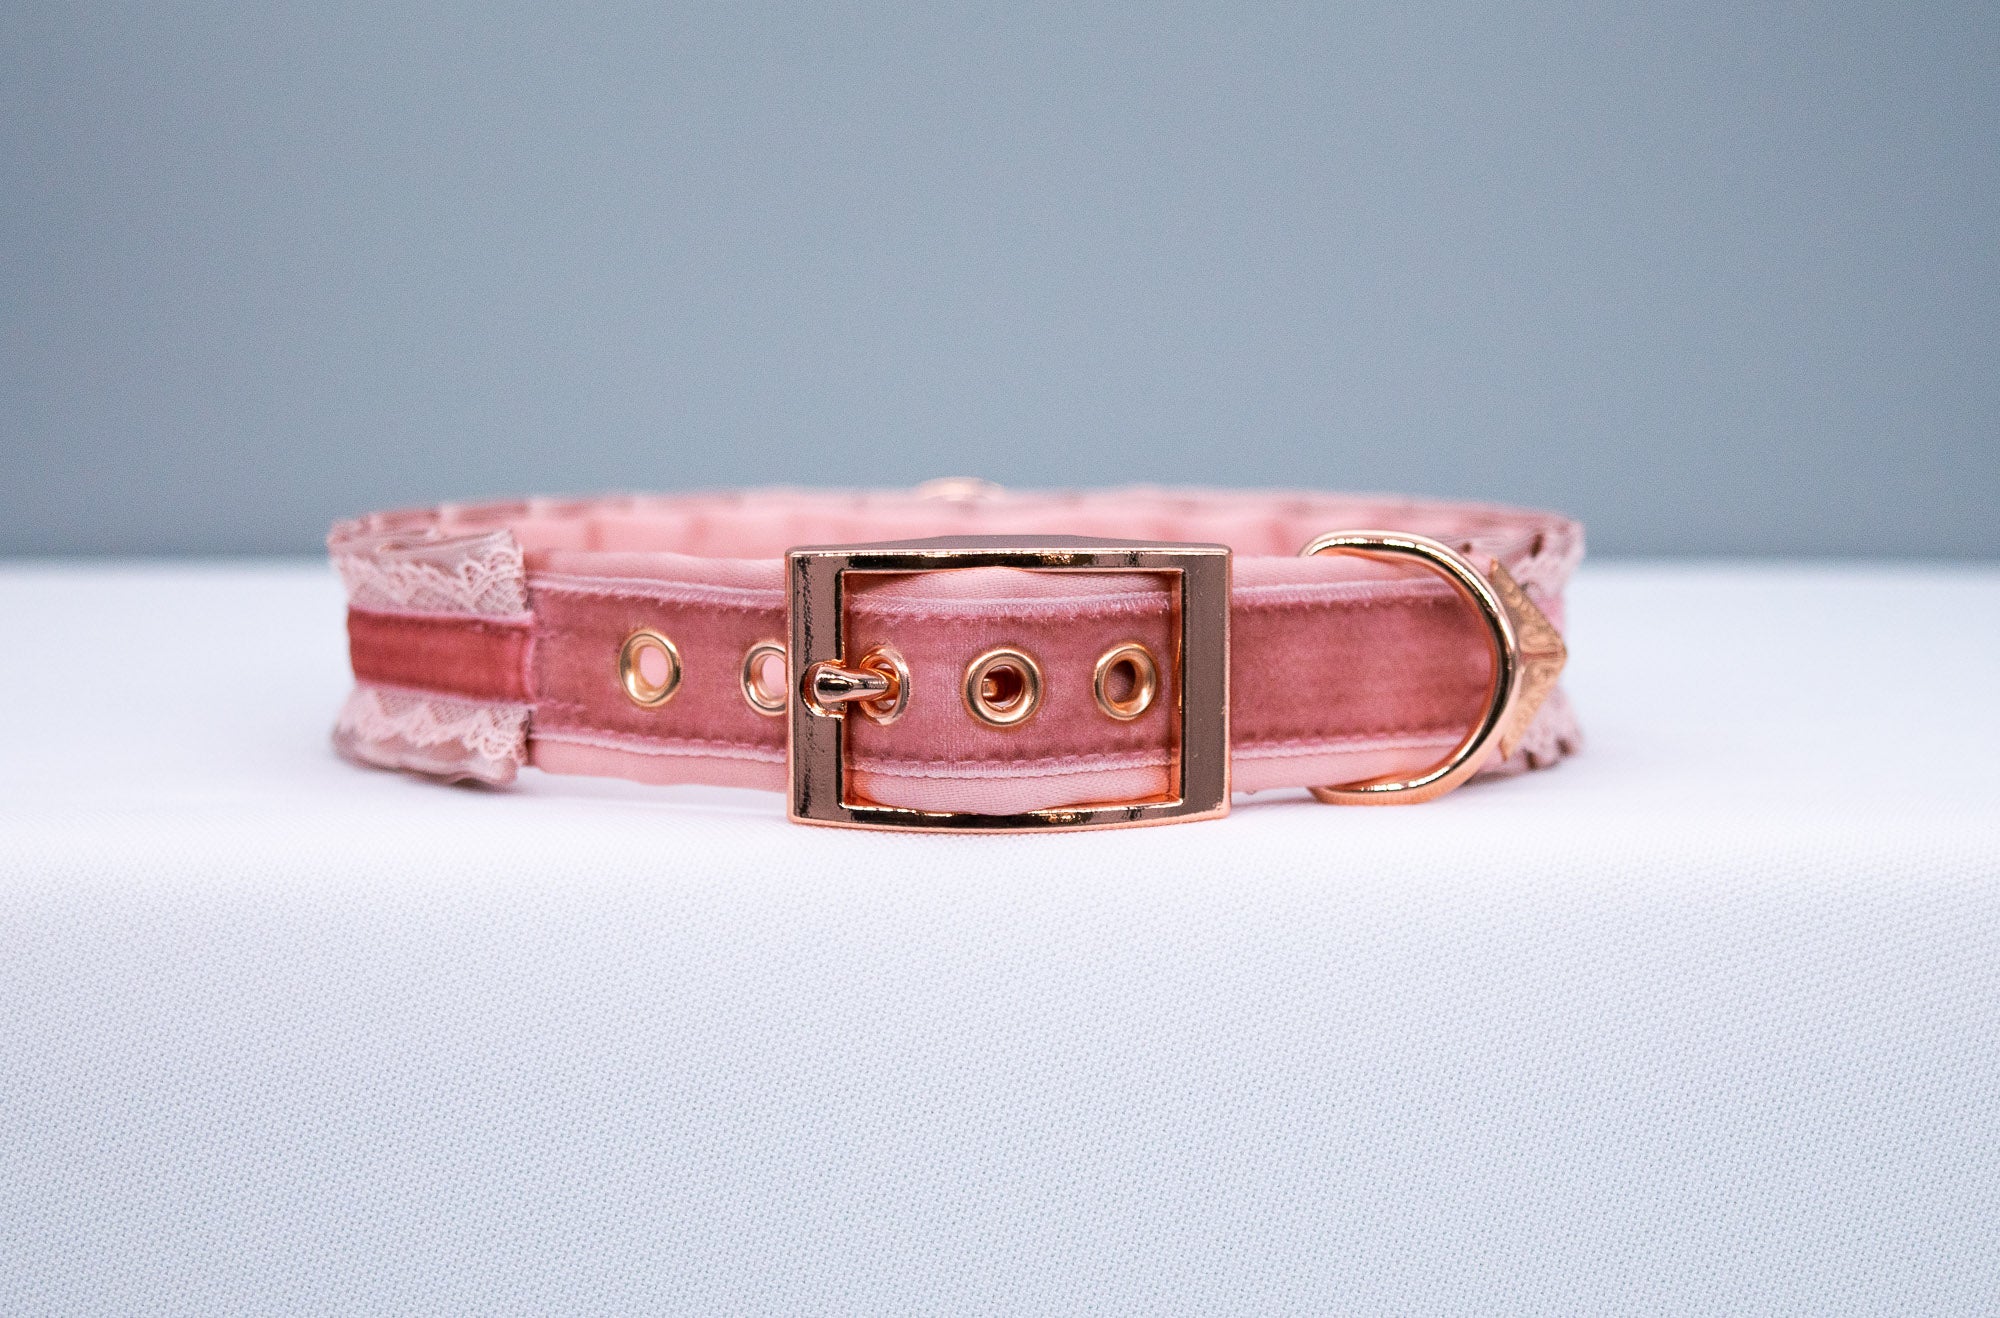 Blush Velvet and Dusty Rose Lacey BDSM Collar in Rose Gold